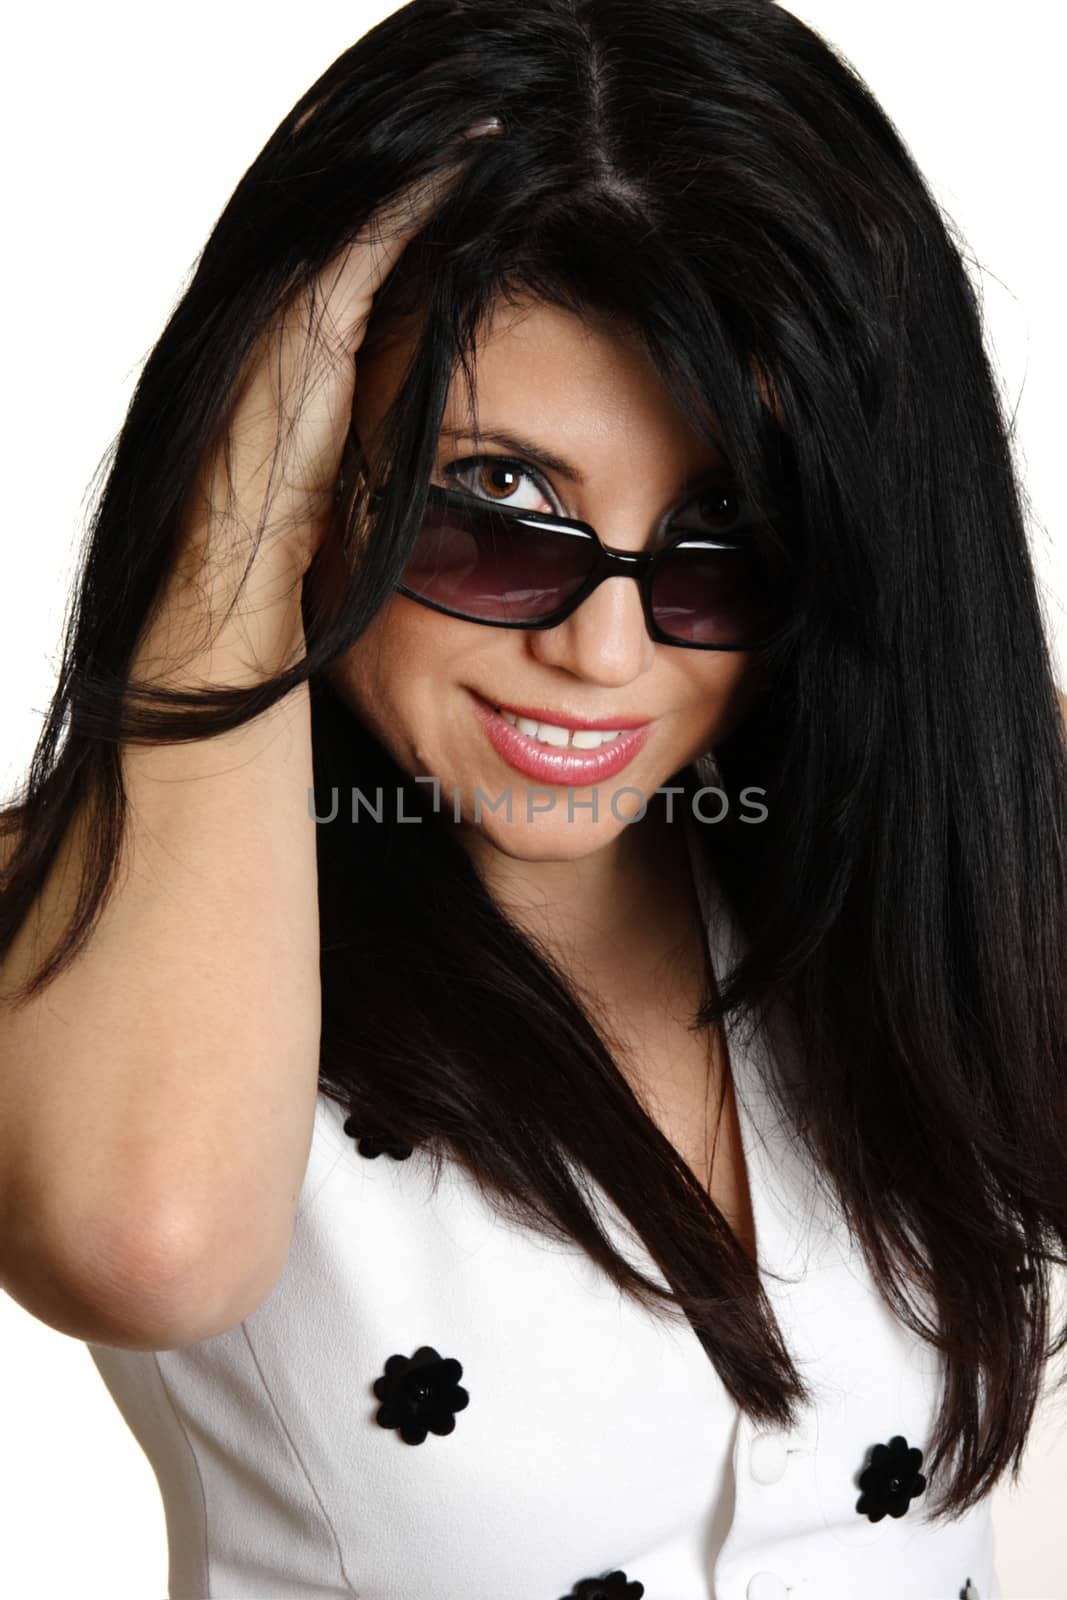 Beautiful young brunette woman smiling and looking over her sunglasses.  She has thick long black hair.  Feeling fabulous.  Fashion beauty, white background.